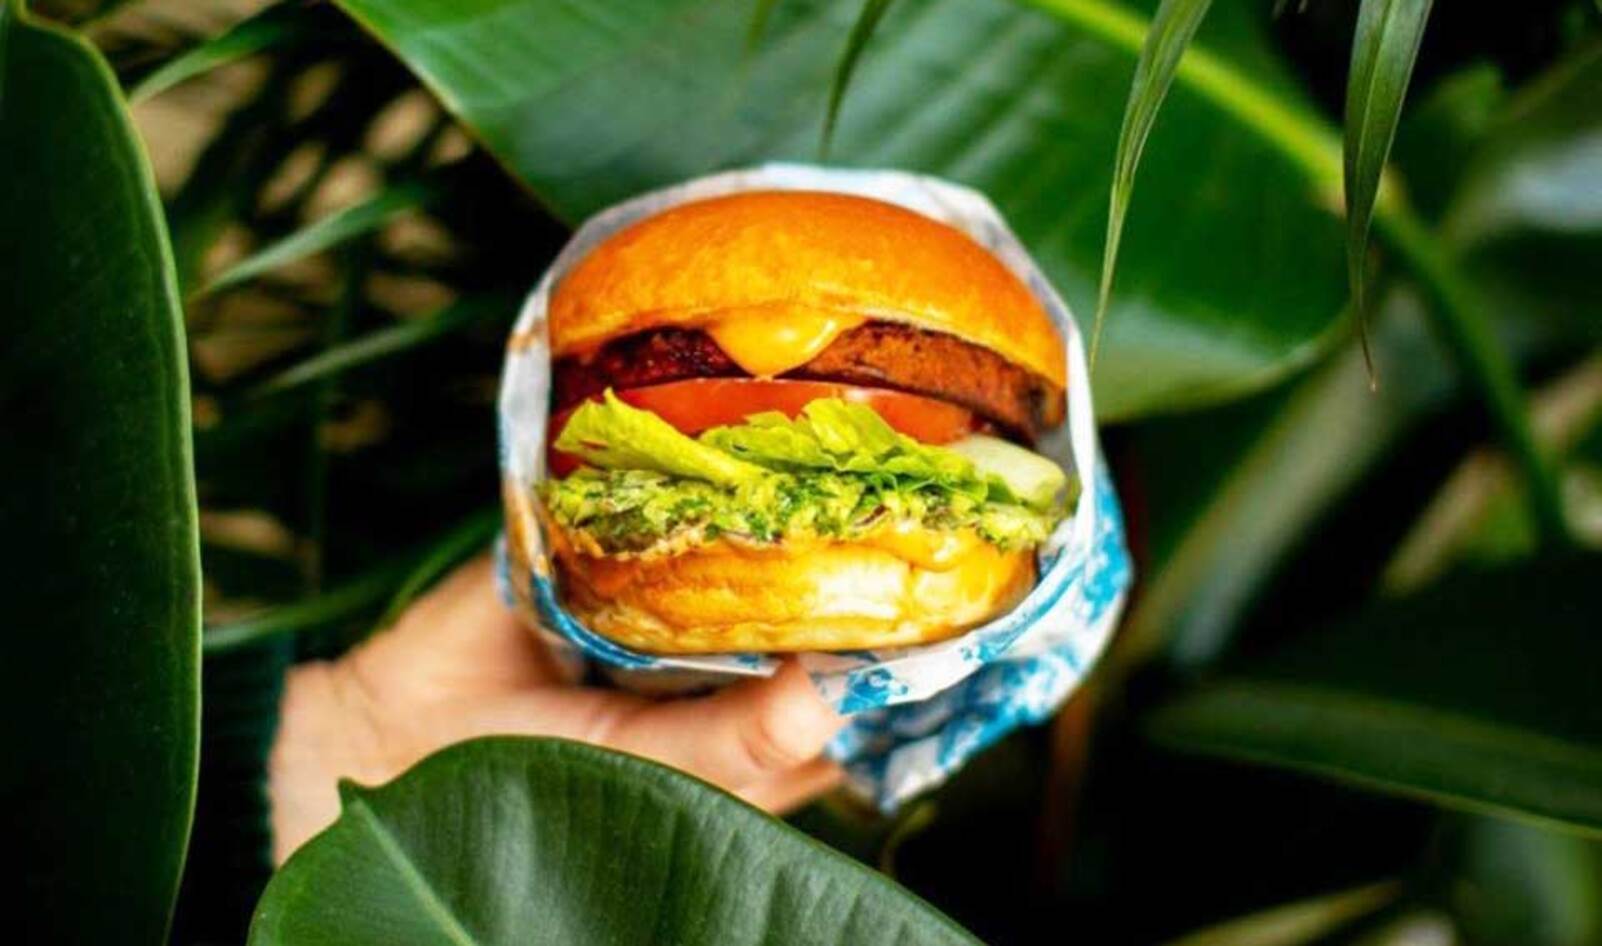 Sales of Vegan Burgers at UK Chain Leon Overtake Meat for First Time